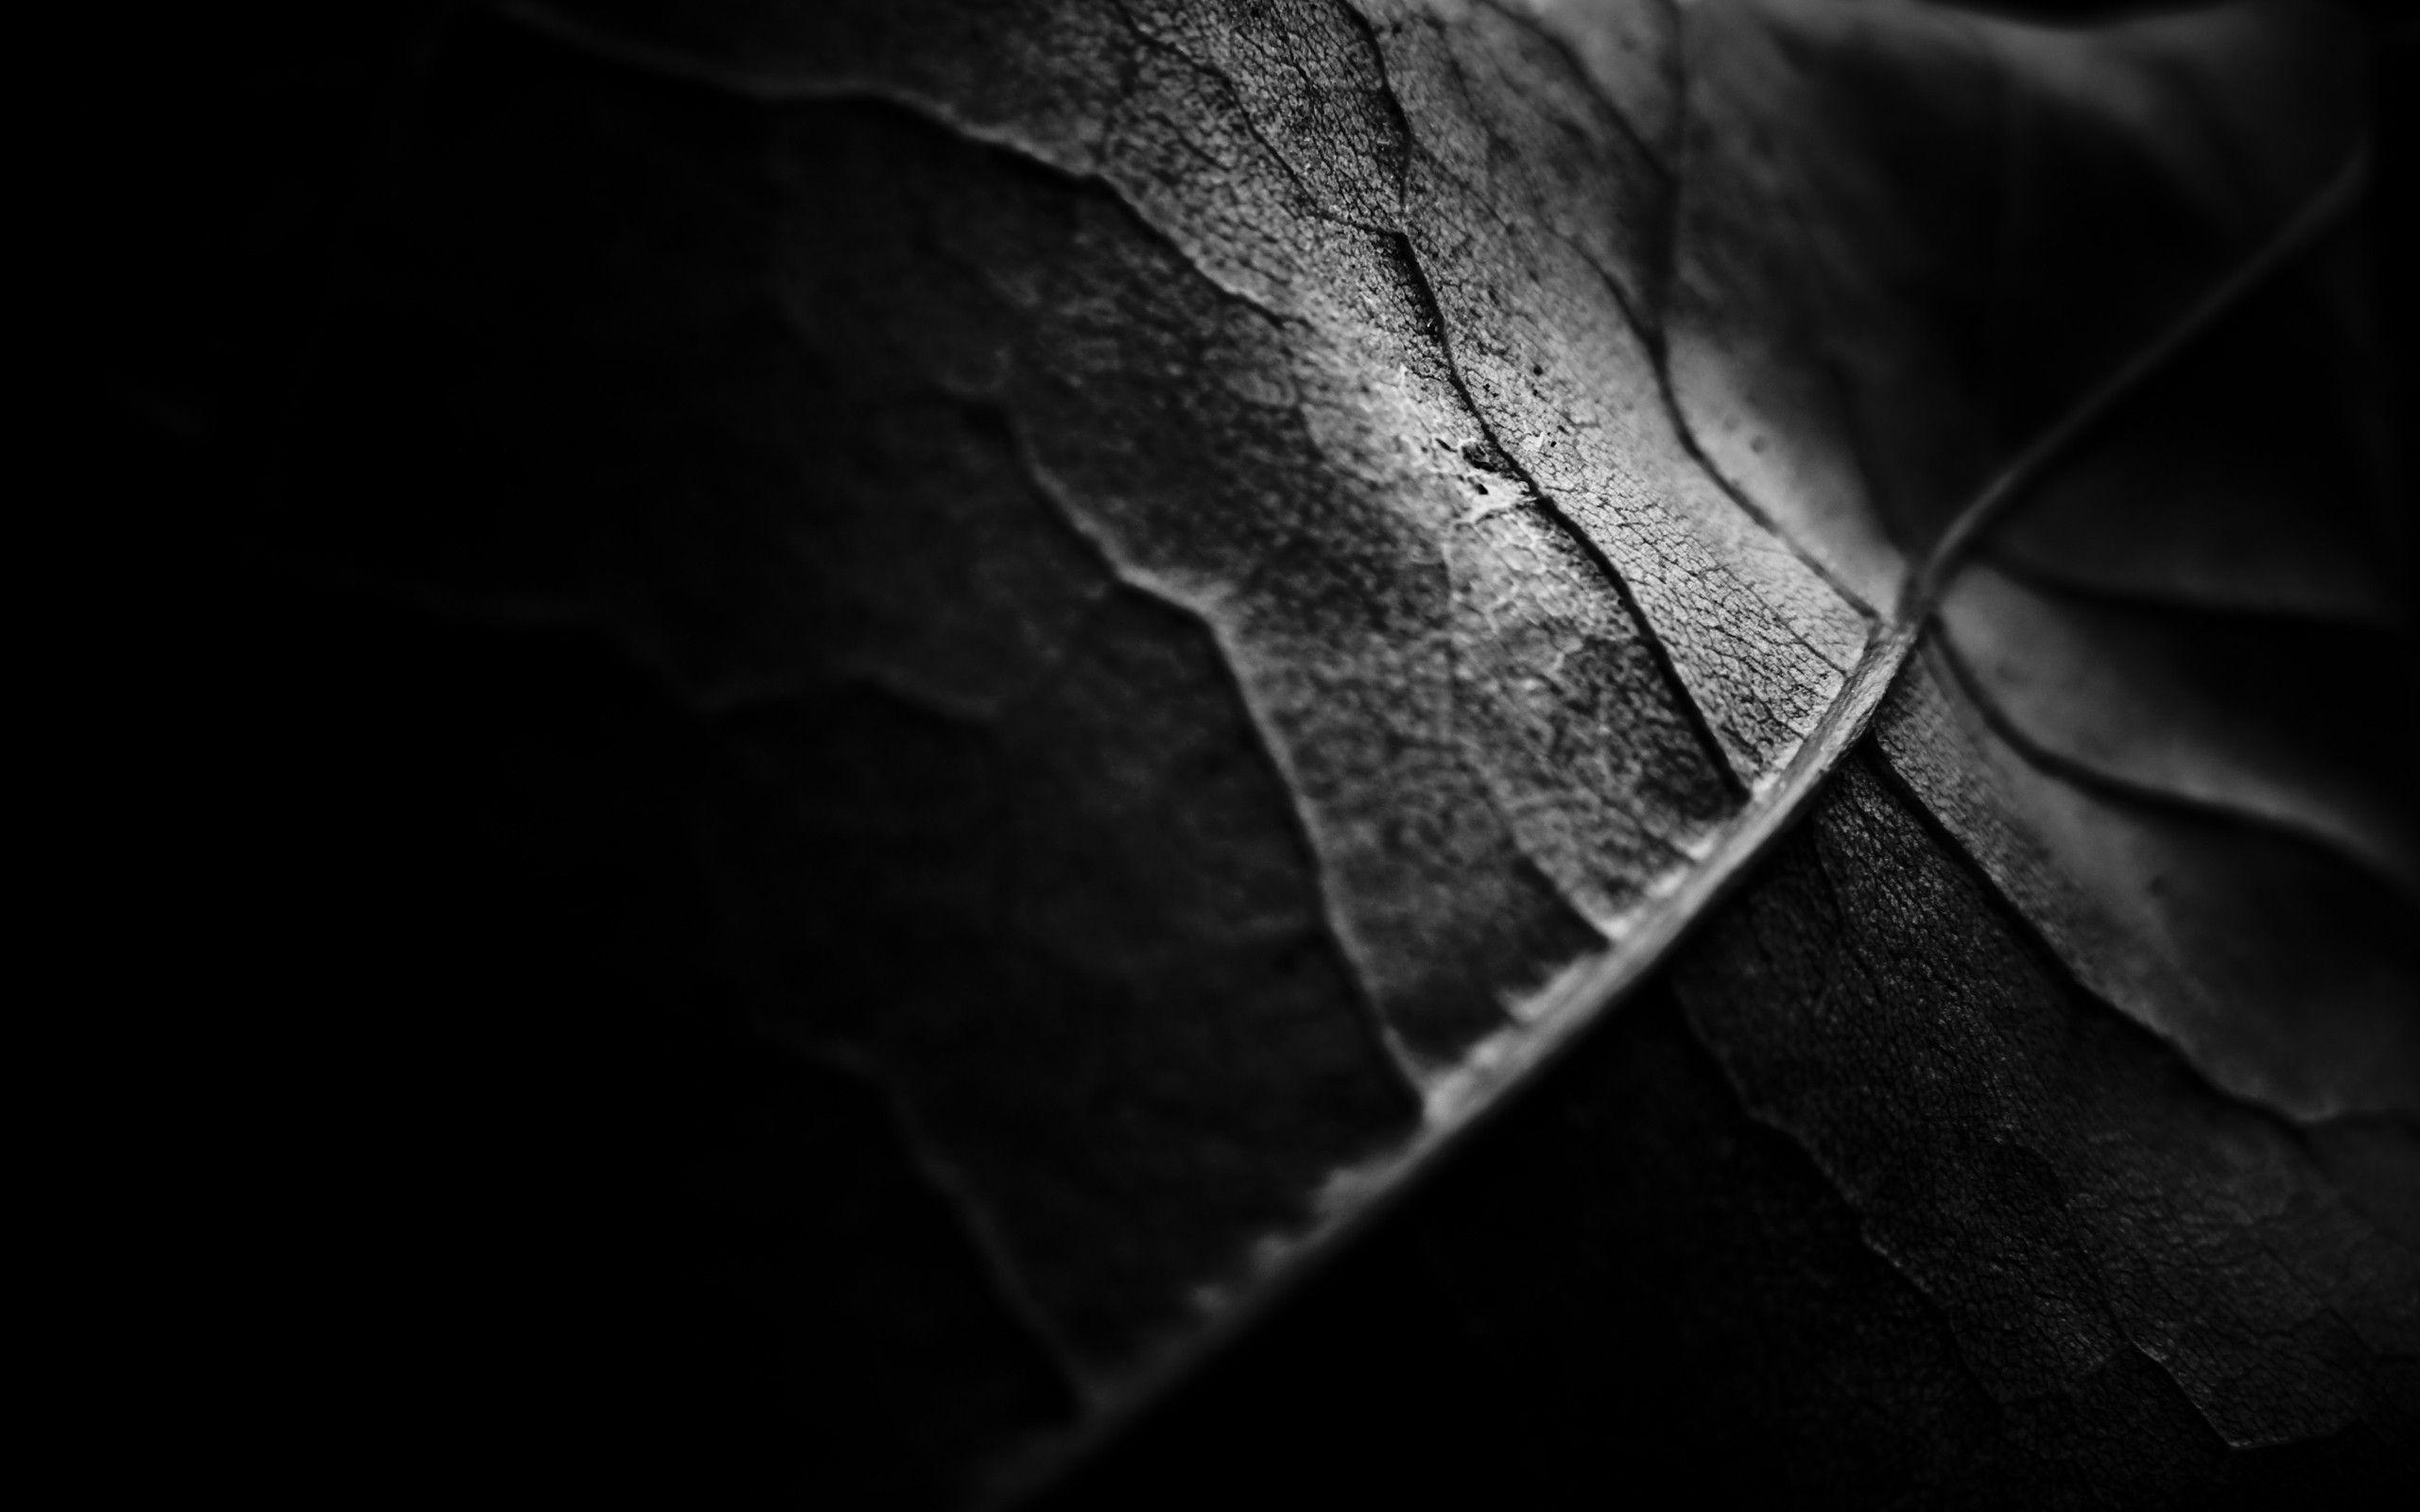 Black Leaves Wallpapers - Top Free Black Leaves Backgrounds